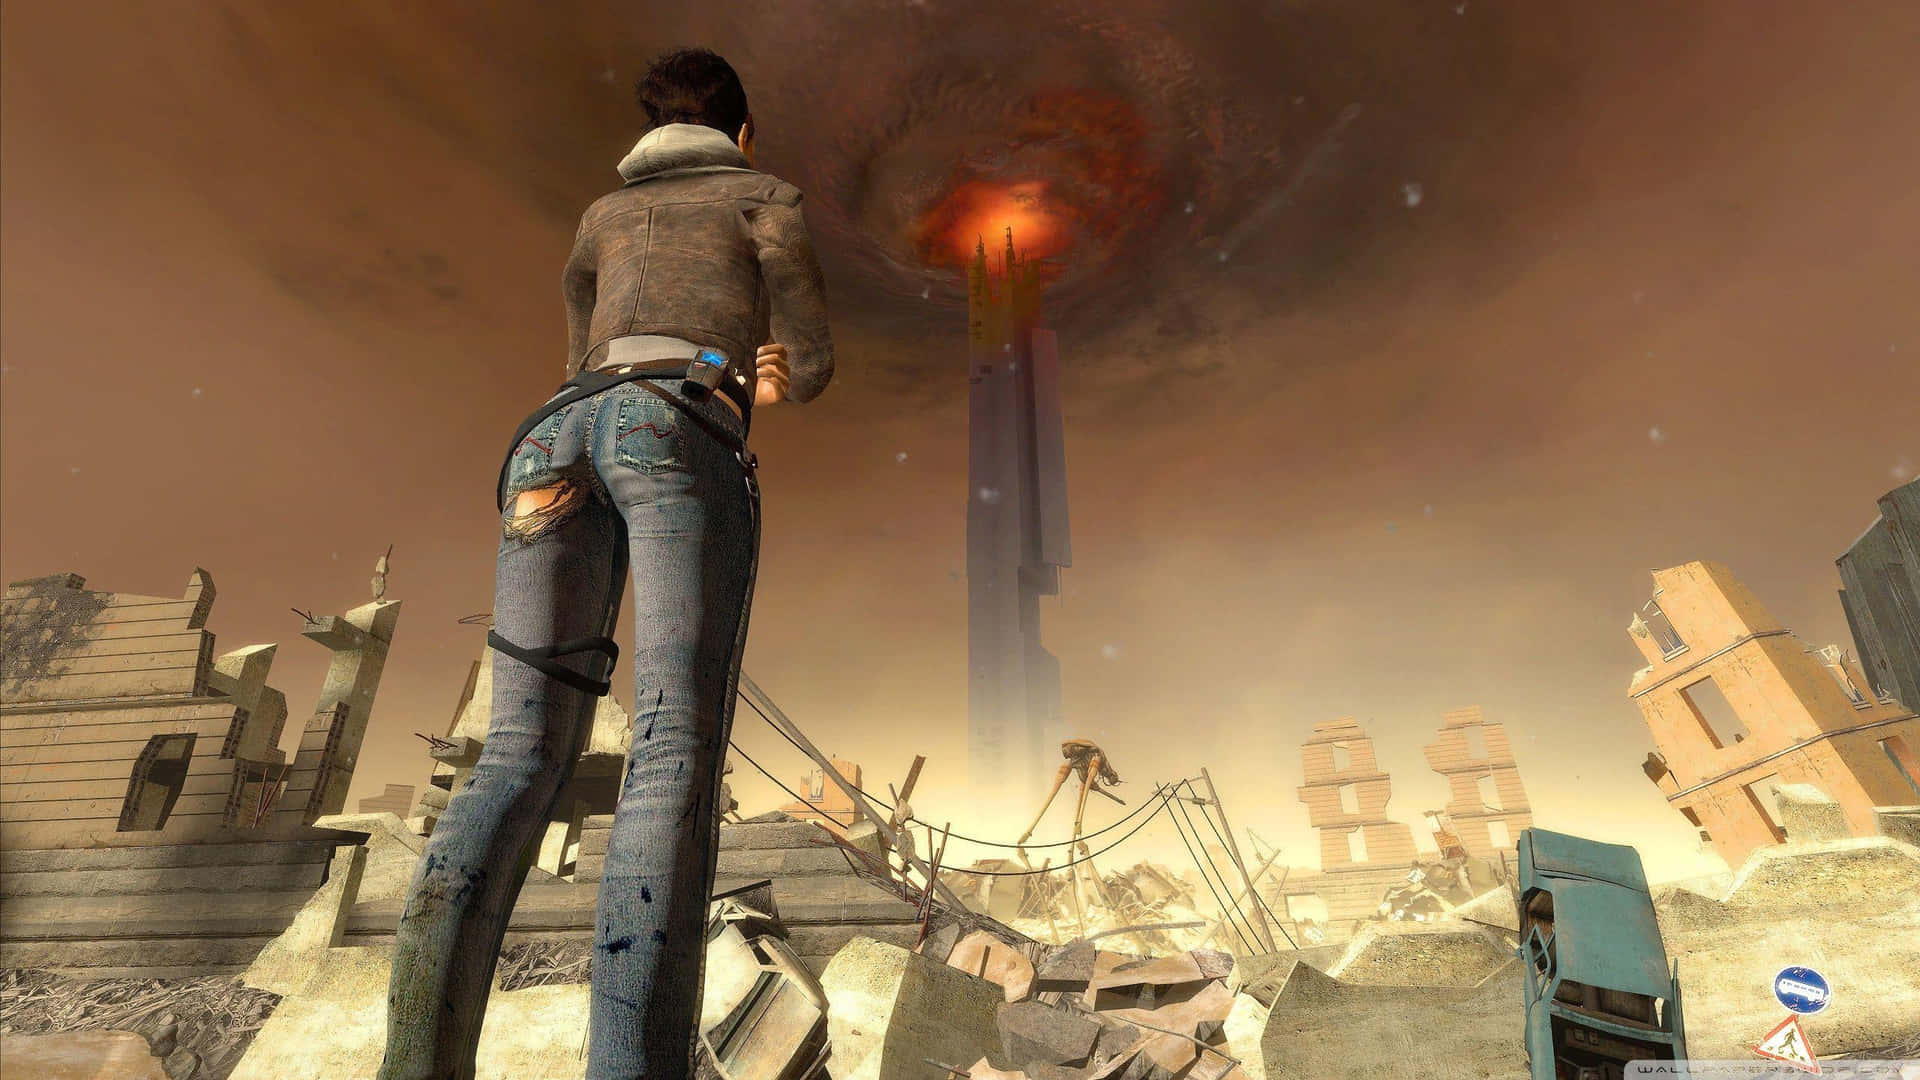 “Experience the post-apocalyptic world of Half-Life 2.” Wallpaper